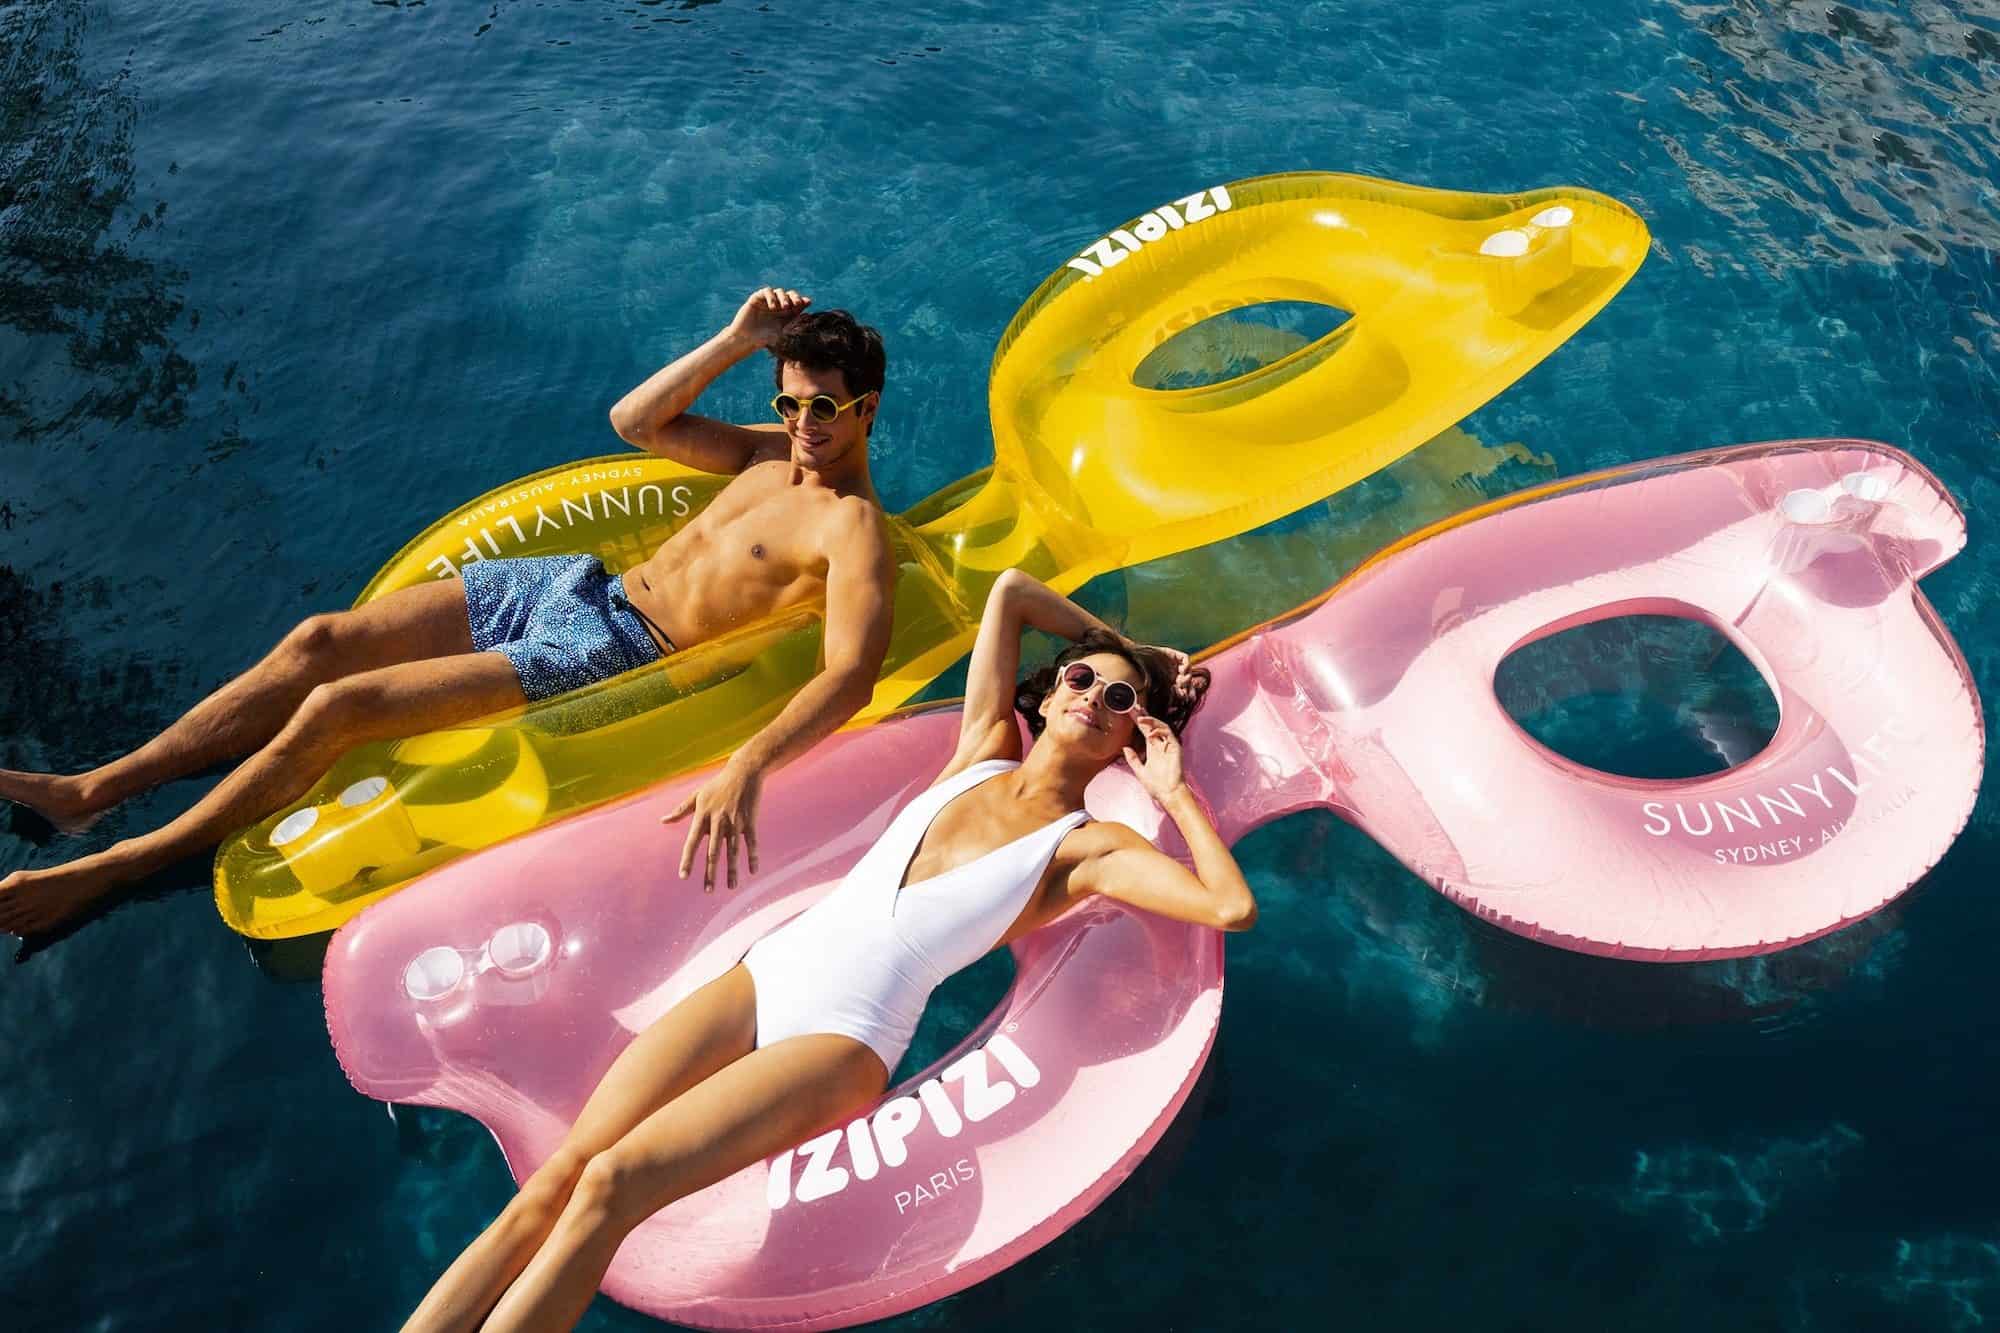 French brand IZIPIZI creates trendy and youthful glasses and sunglasses for women, men, kids and babies like those worn by this man and woman floating on huge floats in the shape of glasses on the sea.